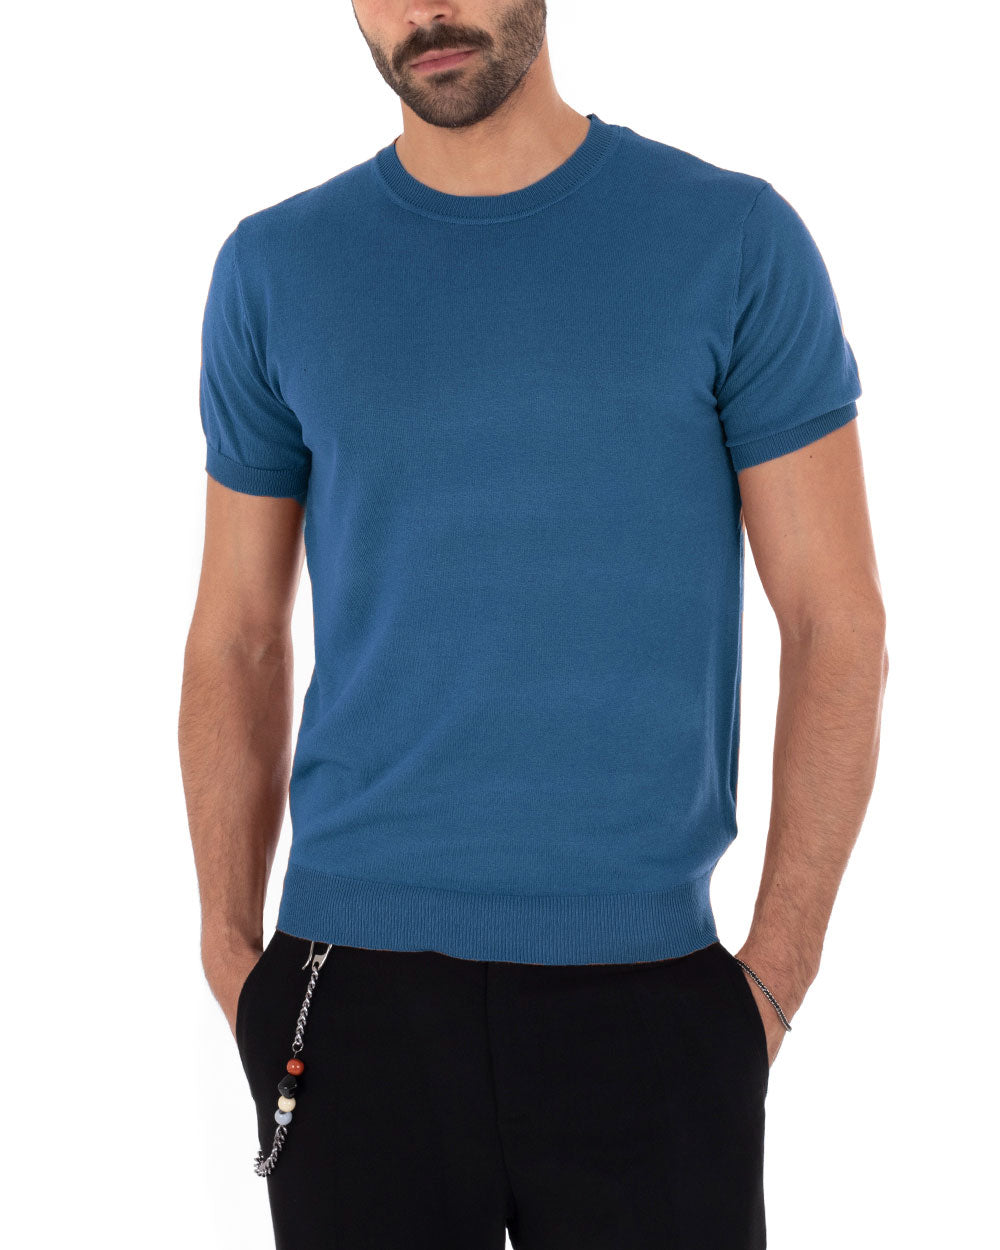 Men's T-Shirt Short Sleeve Solid Color Dark Blue Round Neck Thread Casual GIOSAL-TS2775A